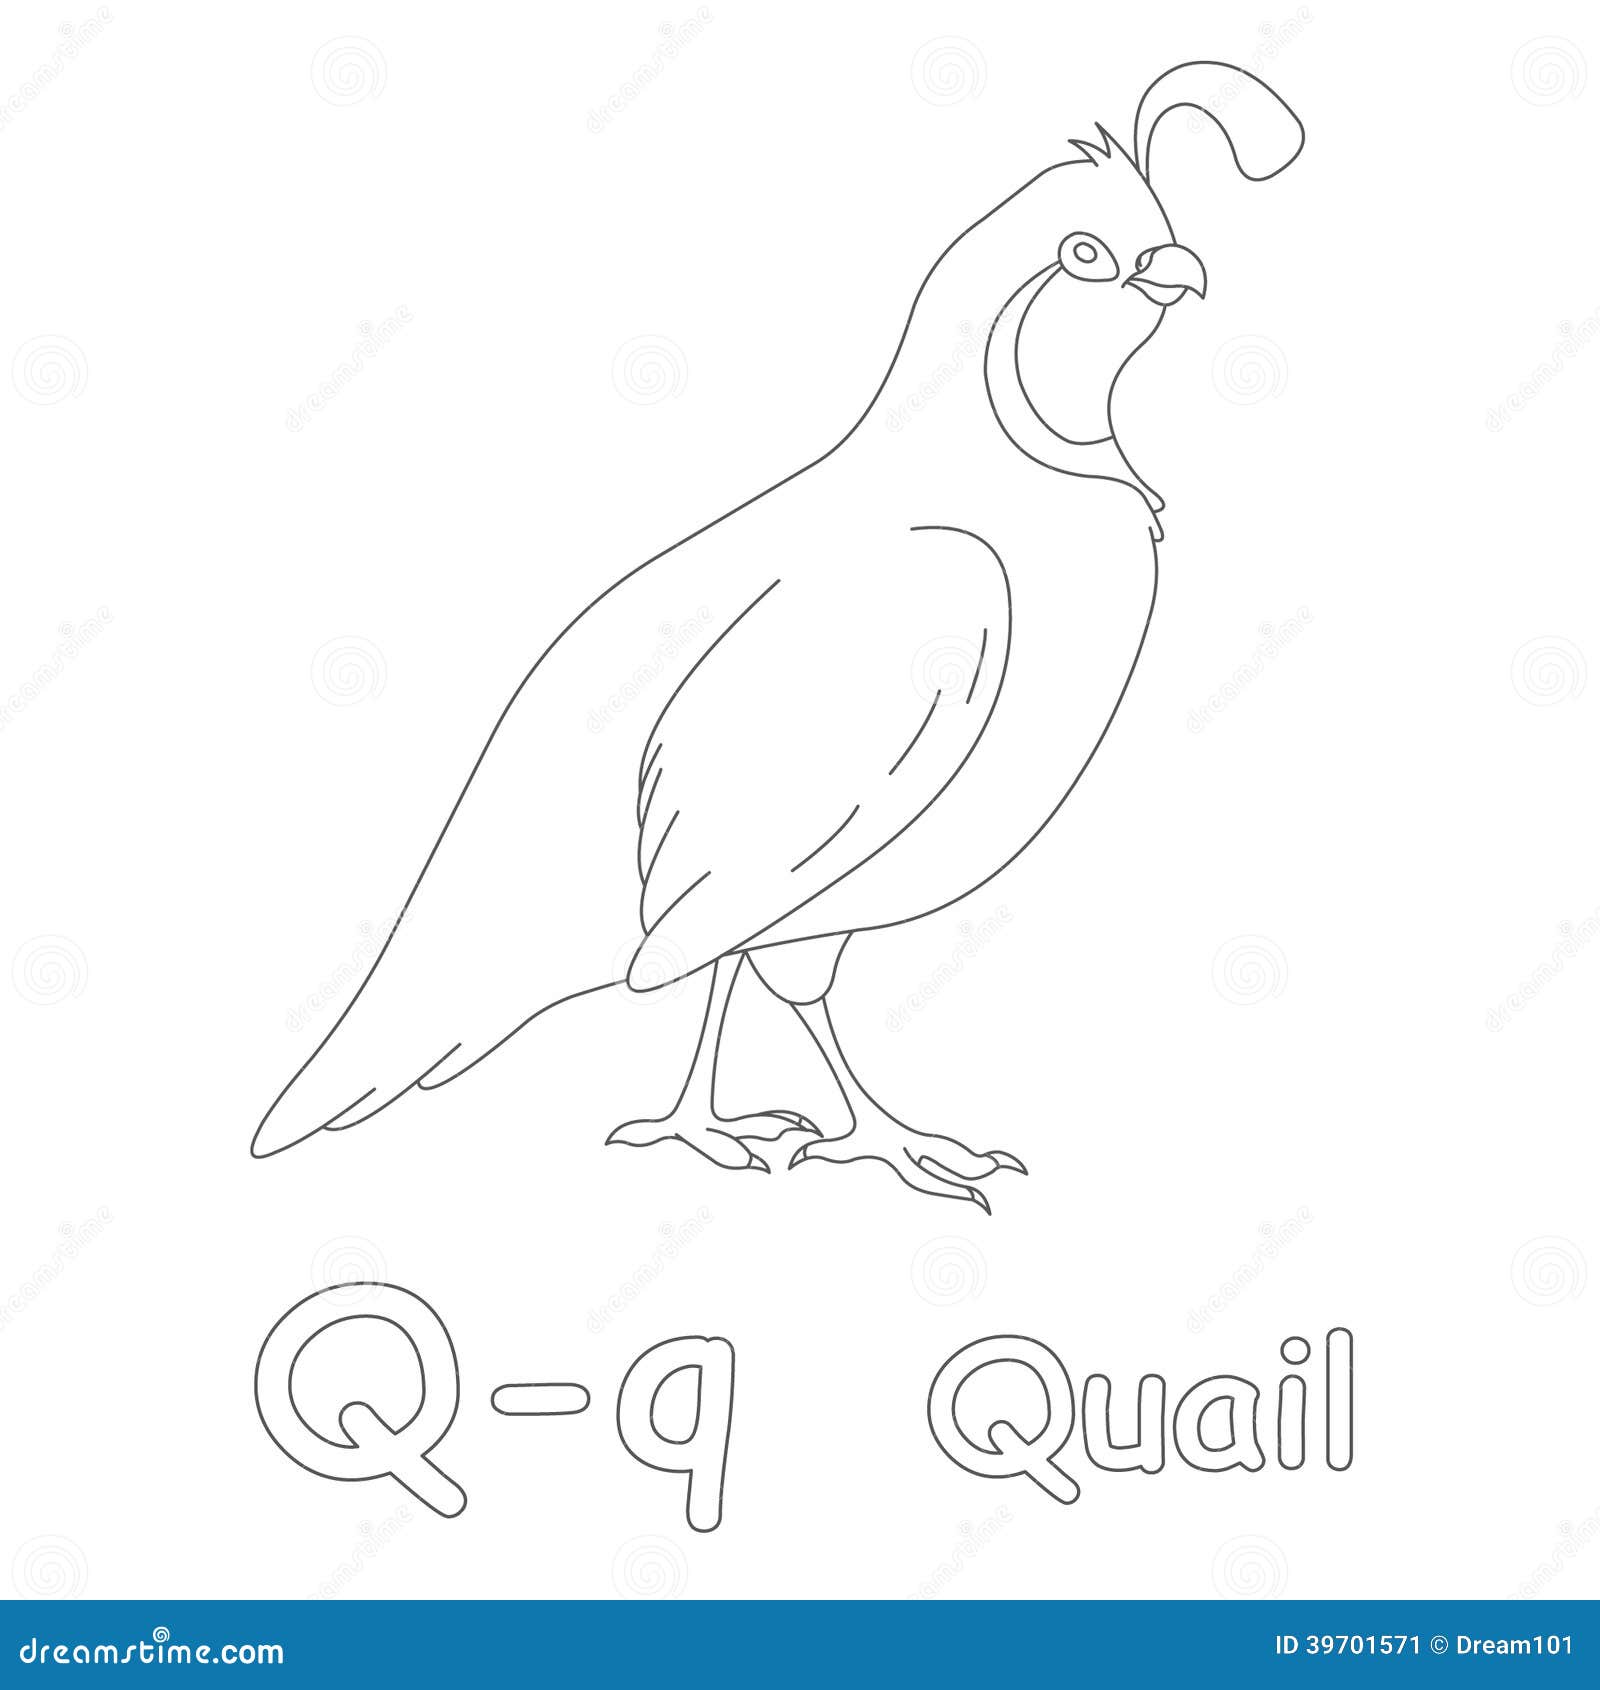 Q for Quail Coloring Page stock illustration. Illustration of ...